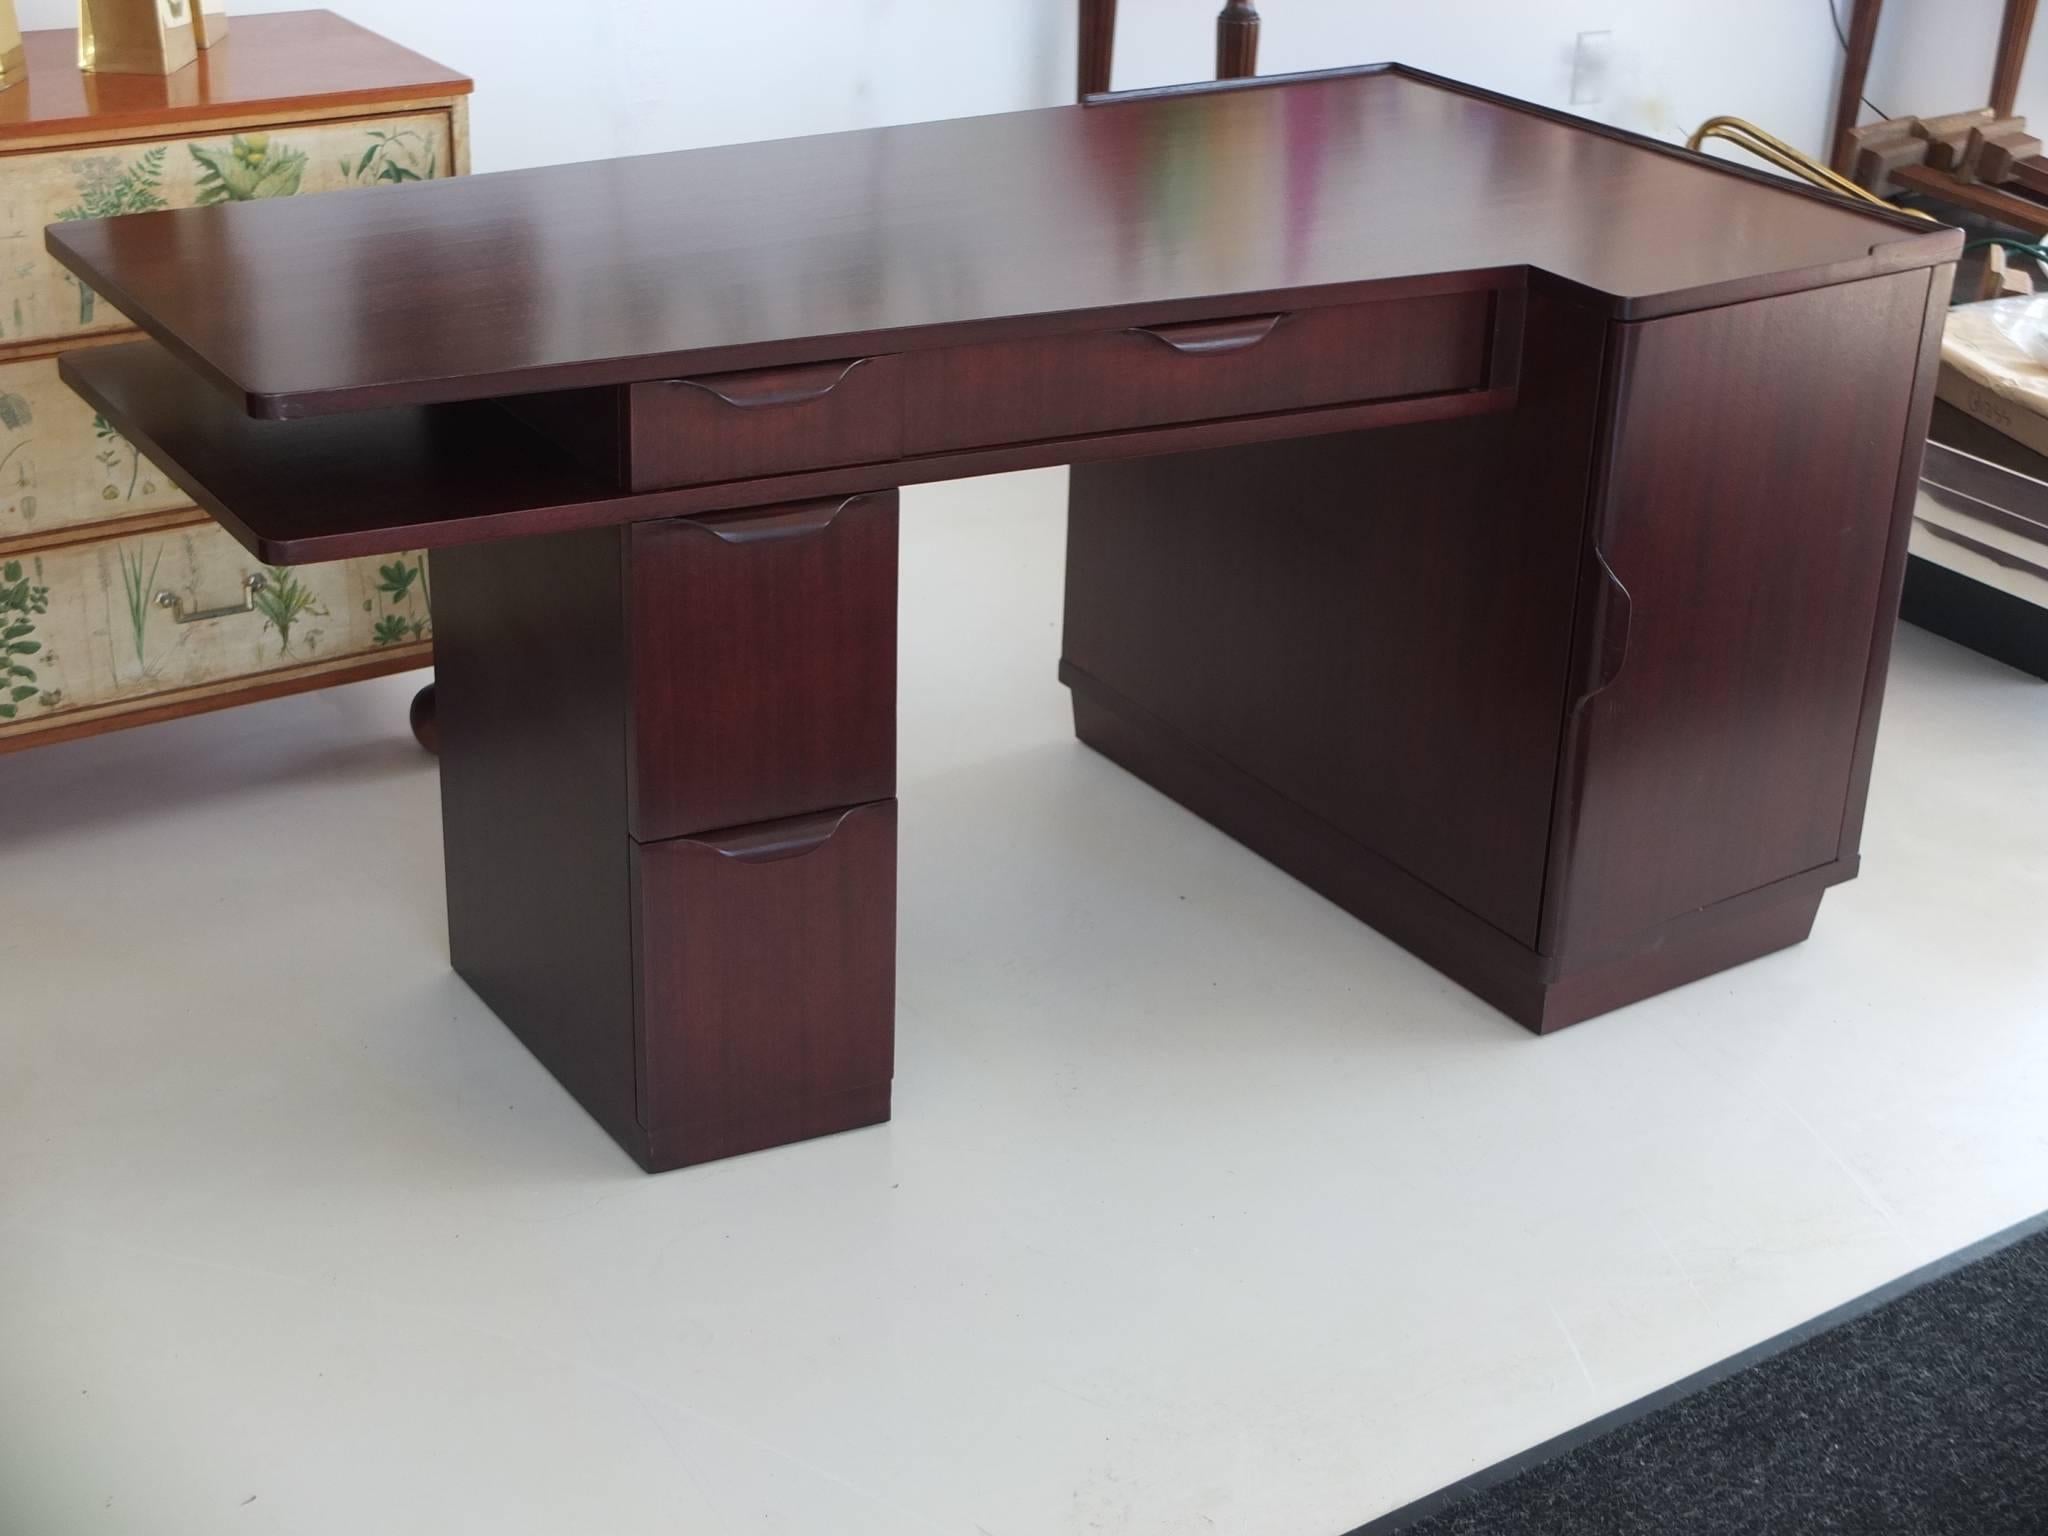 1940s trapezoidal form mahogany desk designed by Edward Wormley for directional. Open on three sides. Four drawers including typewriter tray shelf which extends and contracts via a spring mechanism. Newly restored. Excellent.

Kneehole measures: